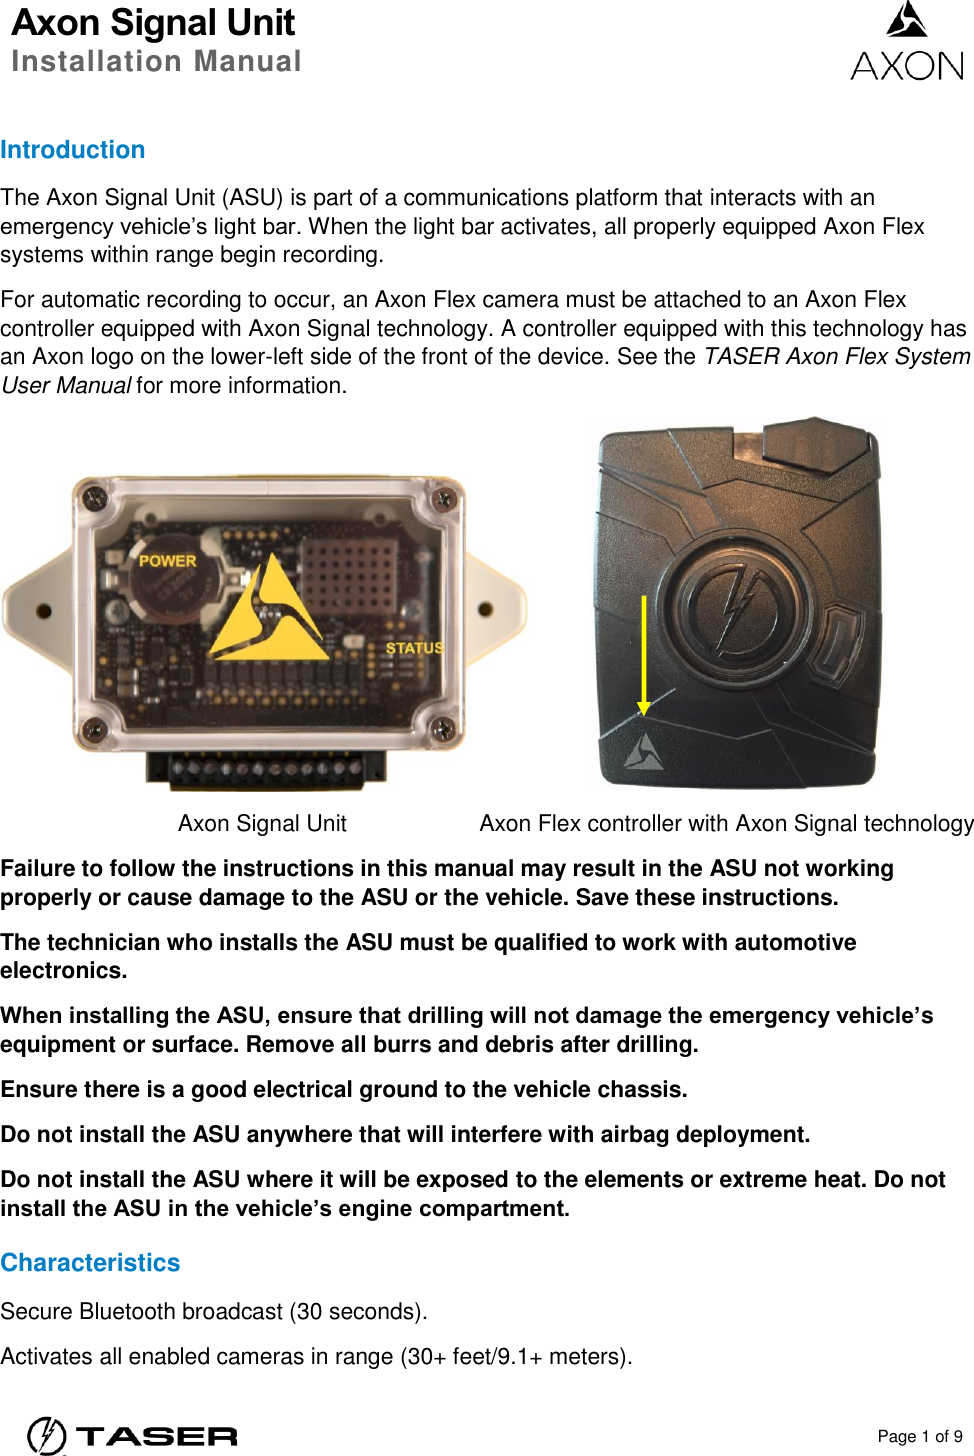 Axon Signal Unit Installation Manual    Page 1 of 9  Introduction The Axon Signal Unit (ASU) is part of a communications platform that interacts with an emergency vehicle’s light bar. When the light bar activates, all properly equipped Axon Flex systems within range begin recording. For automatic recording to occur, an Axon Flex camera must be attached to an Axon Flex controller equipped with Axon Signal technology. A controller equipped with this technology has an Axon logo on the lower-left side of the front of the device. See the TASER Axon Flex System User Manual for more information.      Axon Signal Unit  Axon Flex controller with Axon Signal technology Failure to follow the instructions in this manual may result in the ASU not working properly or cause damage to the ASU or the vehicle. Save these instructions. The technician who installs the ASU must be qualified to work with automotive electronics. When installing the ASU, ensure that drilling will not damage the emergency vehicle’s equipment or surface. Remove all burrs and debris after drilling. Ensure there is a good electrical ground to the vehicle chassis. Do not install the ASU anywhere that will interfere with airbag deployment. Do not install the ASU where it will be exposed to the elements or extreme heat. Do not install the ASU in the vehicle’s engine compartment. Characteristics Secure Bluetooth broadcast (30 seconds). Activates all enabled cameras in range (30+ feet/9.1+ meters). 